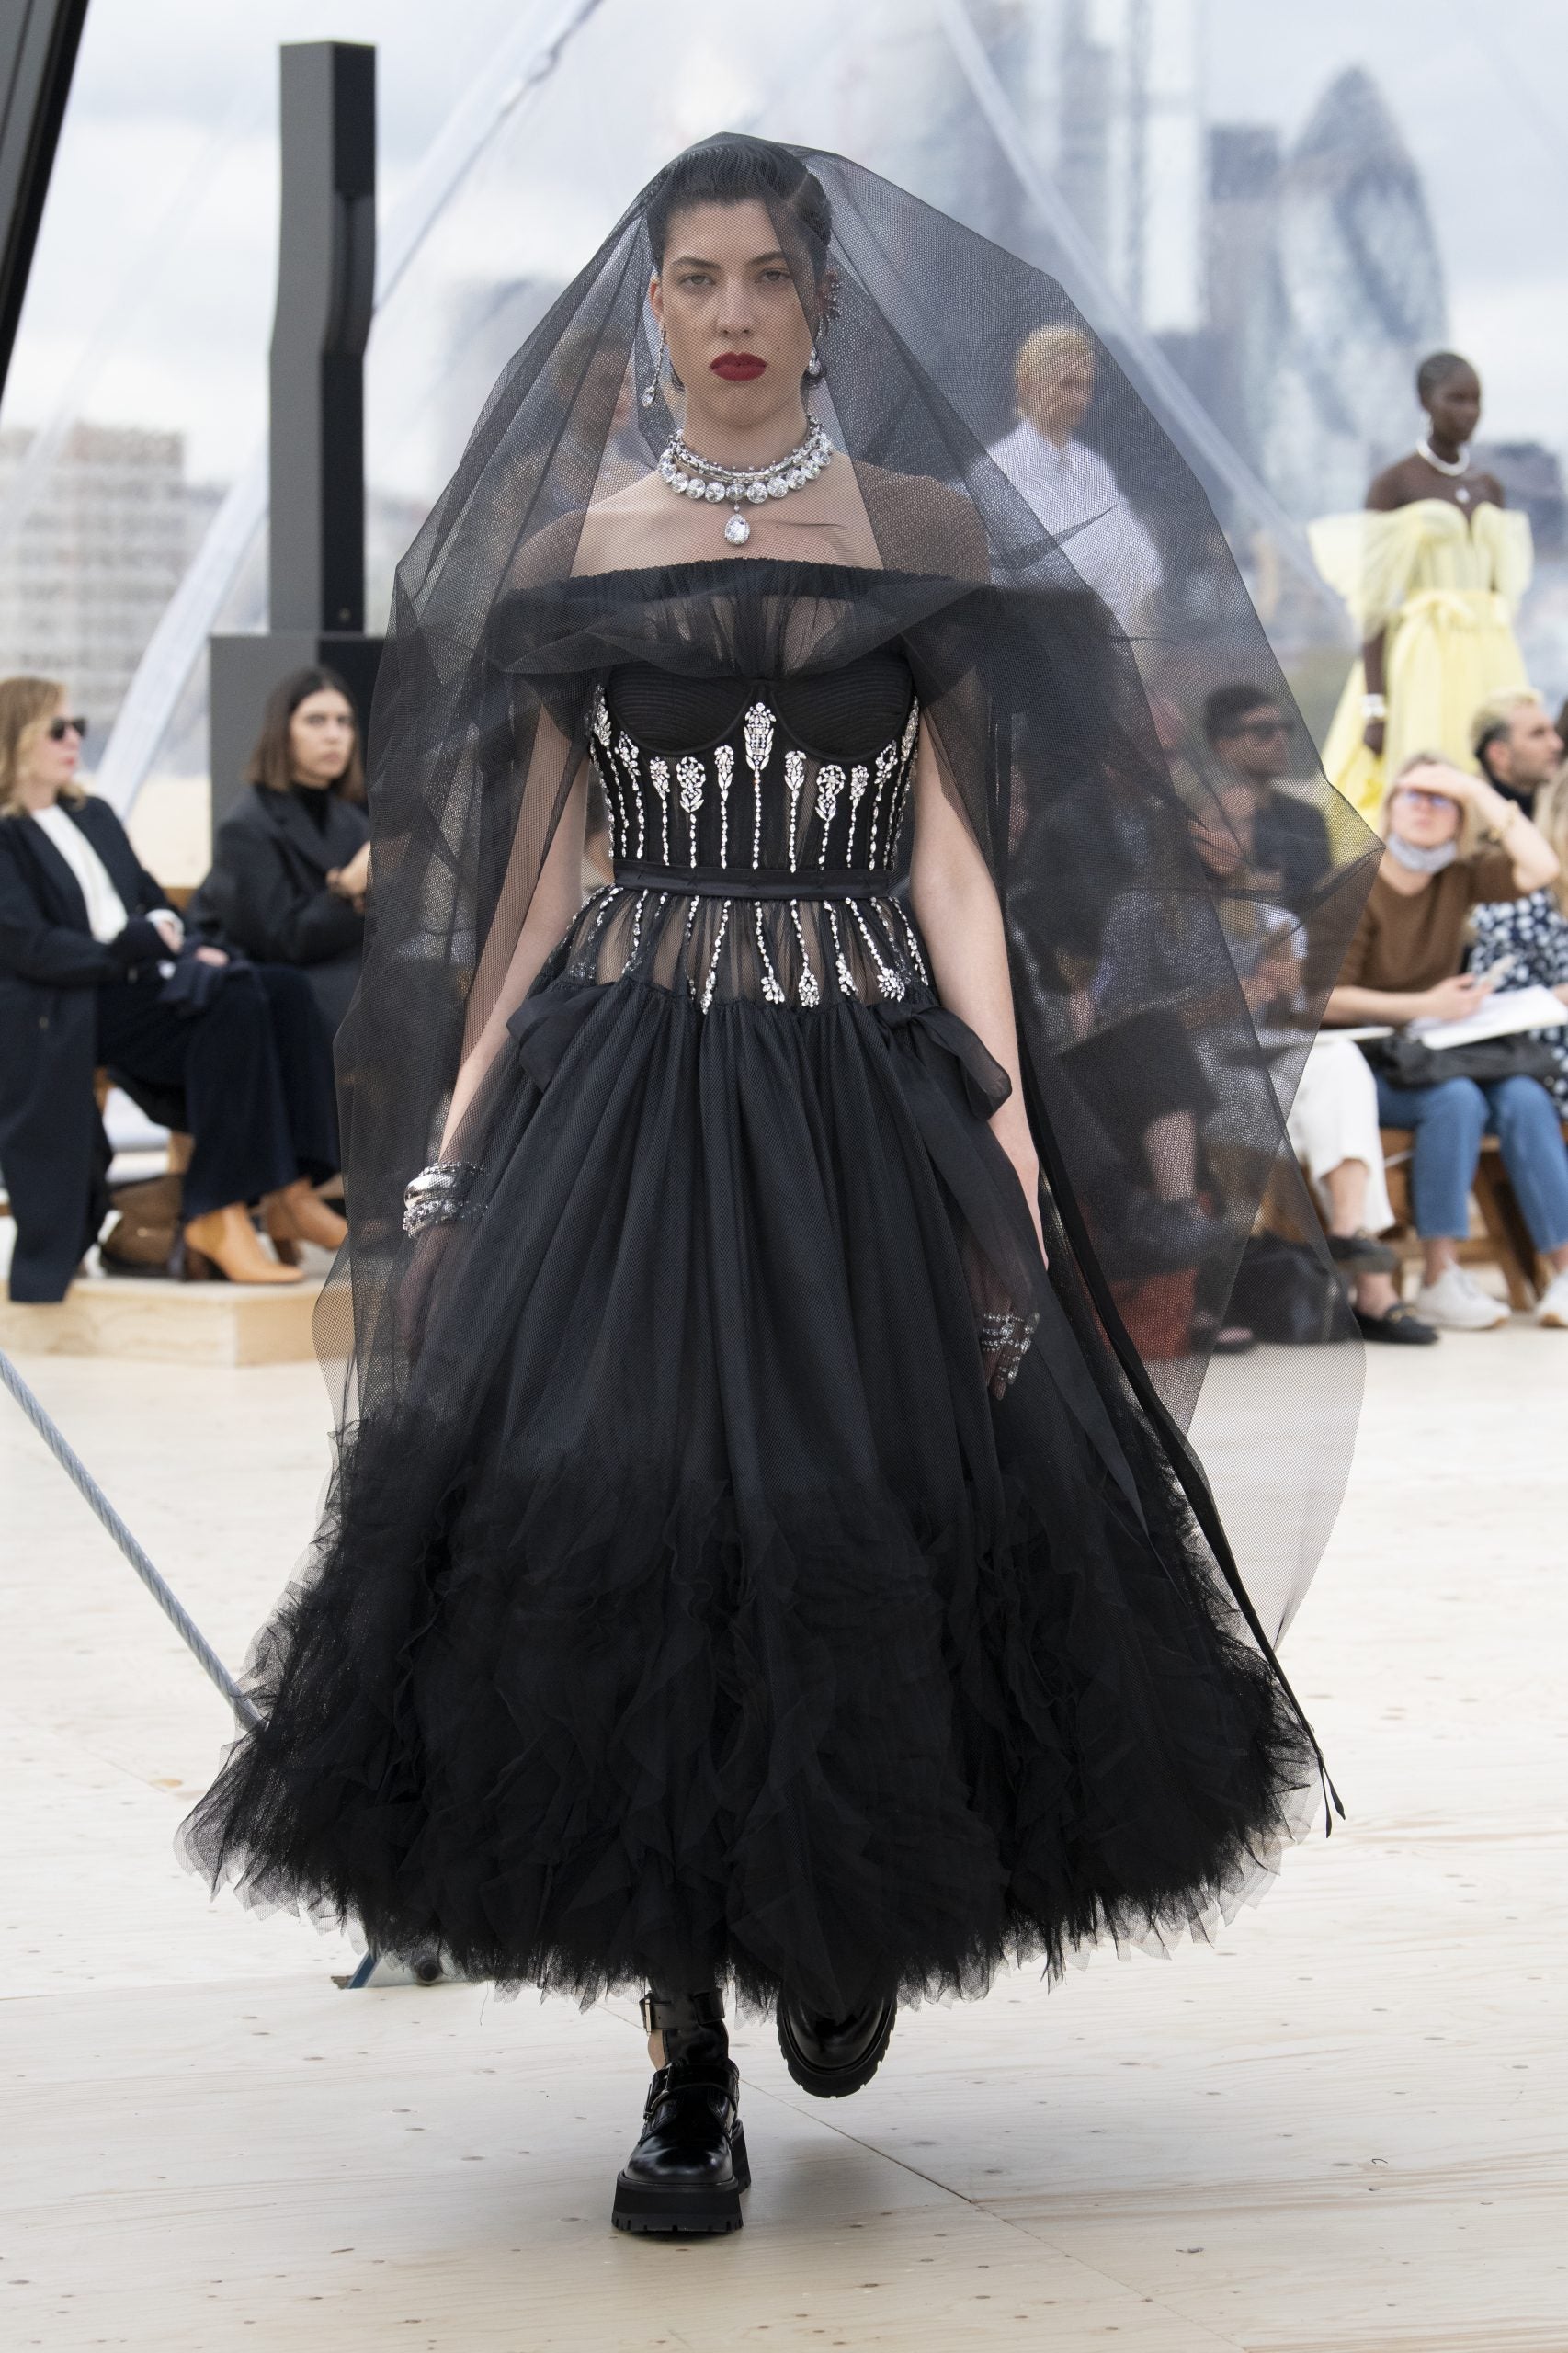 Alexander McQueen’s Spring 2022 Collection Mirrored The Skies Of London